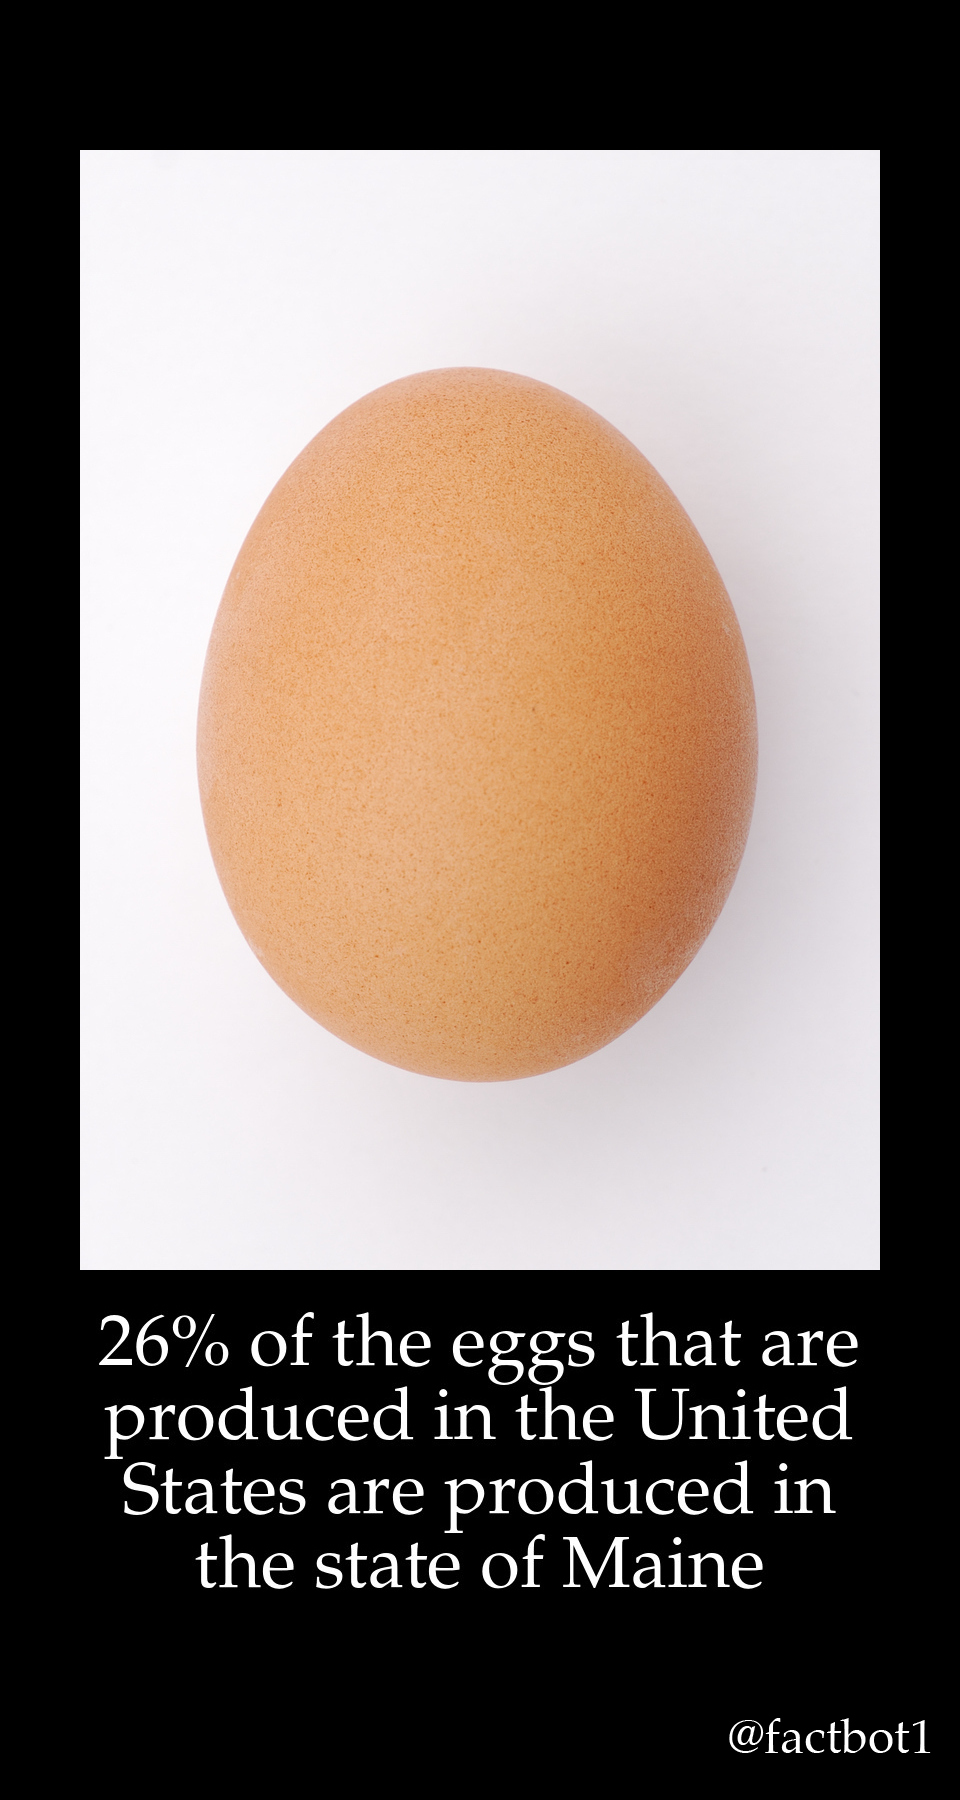 egg - 26% of the eggs that are produced in the United States are produced in the state of Maine